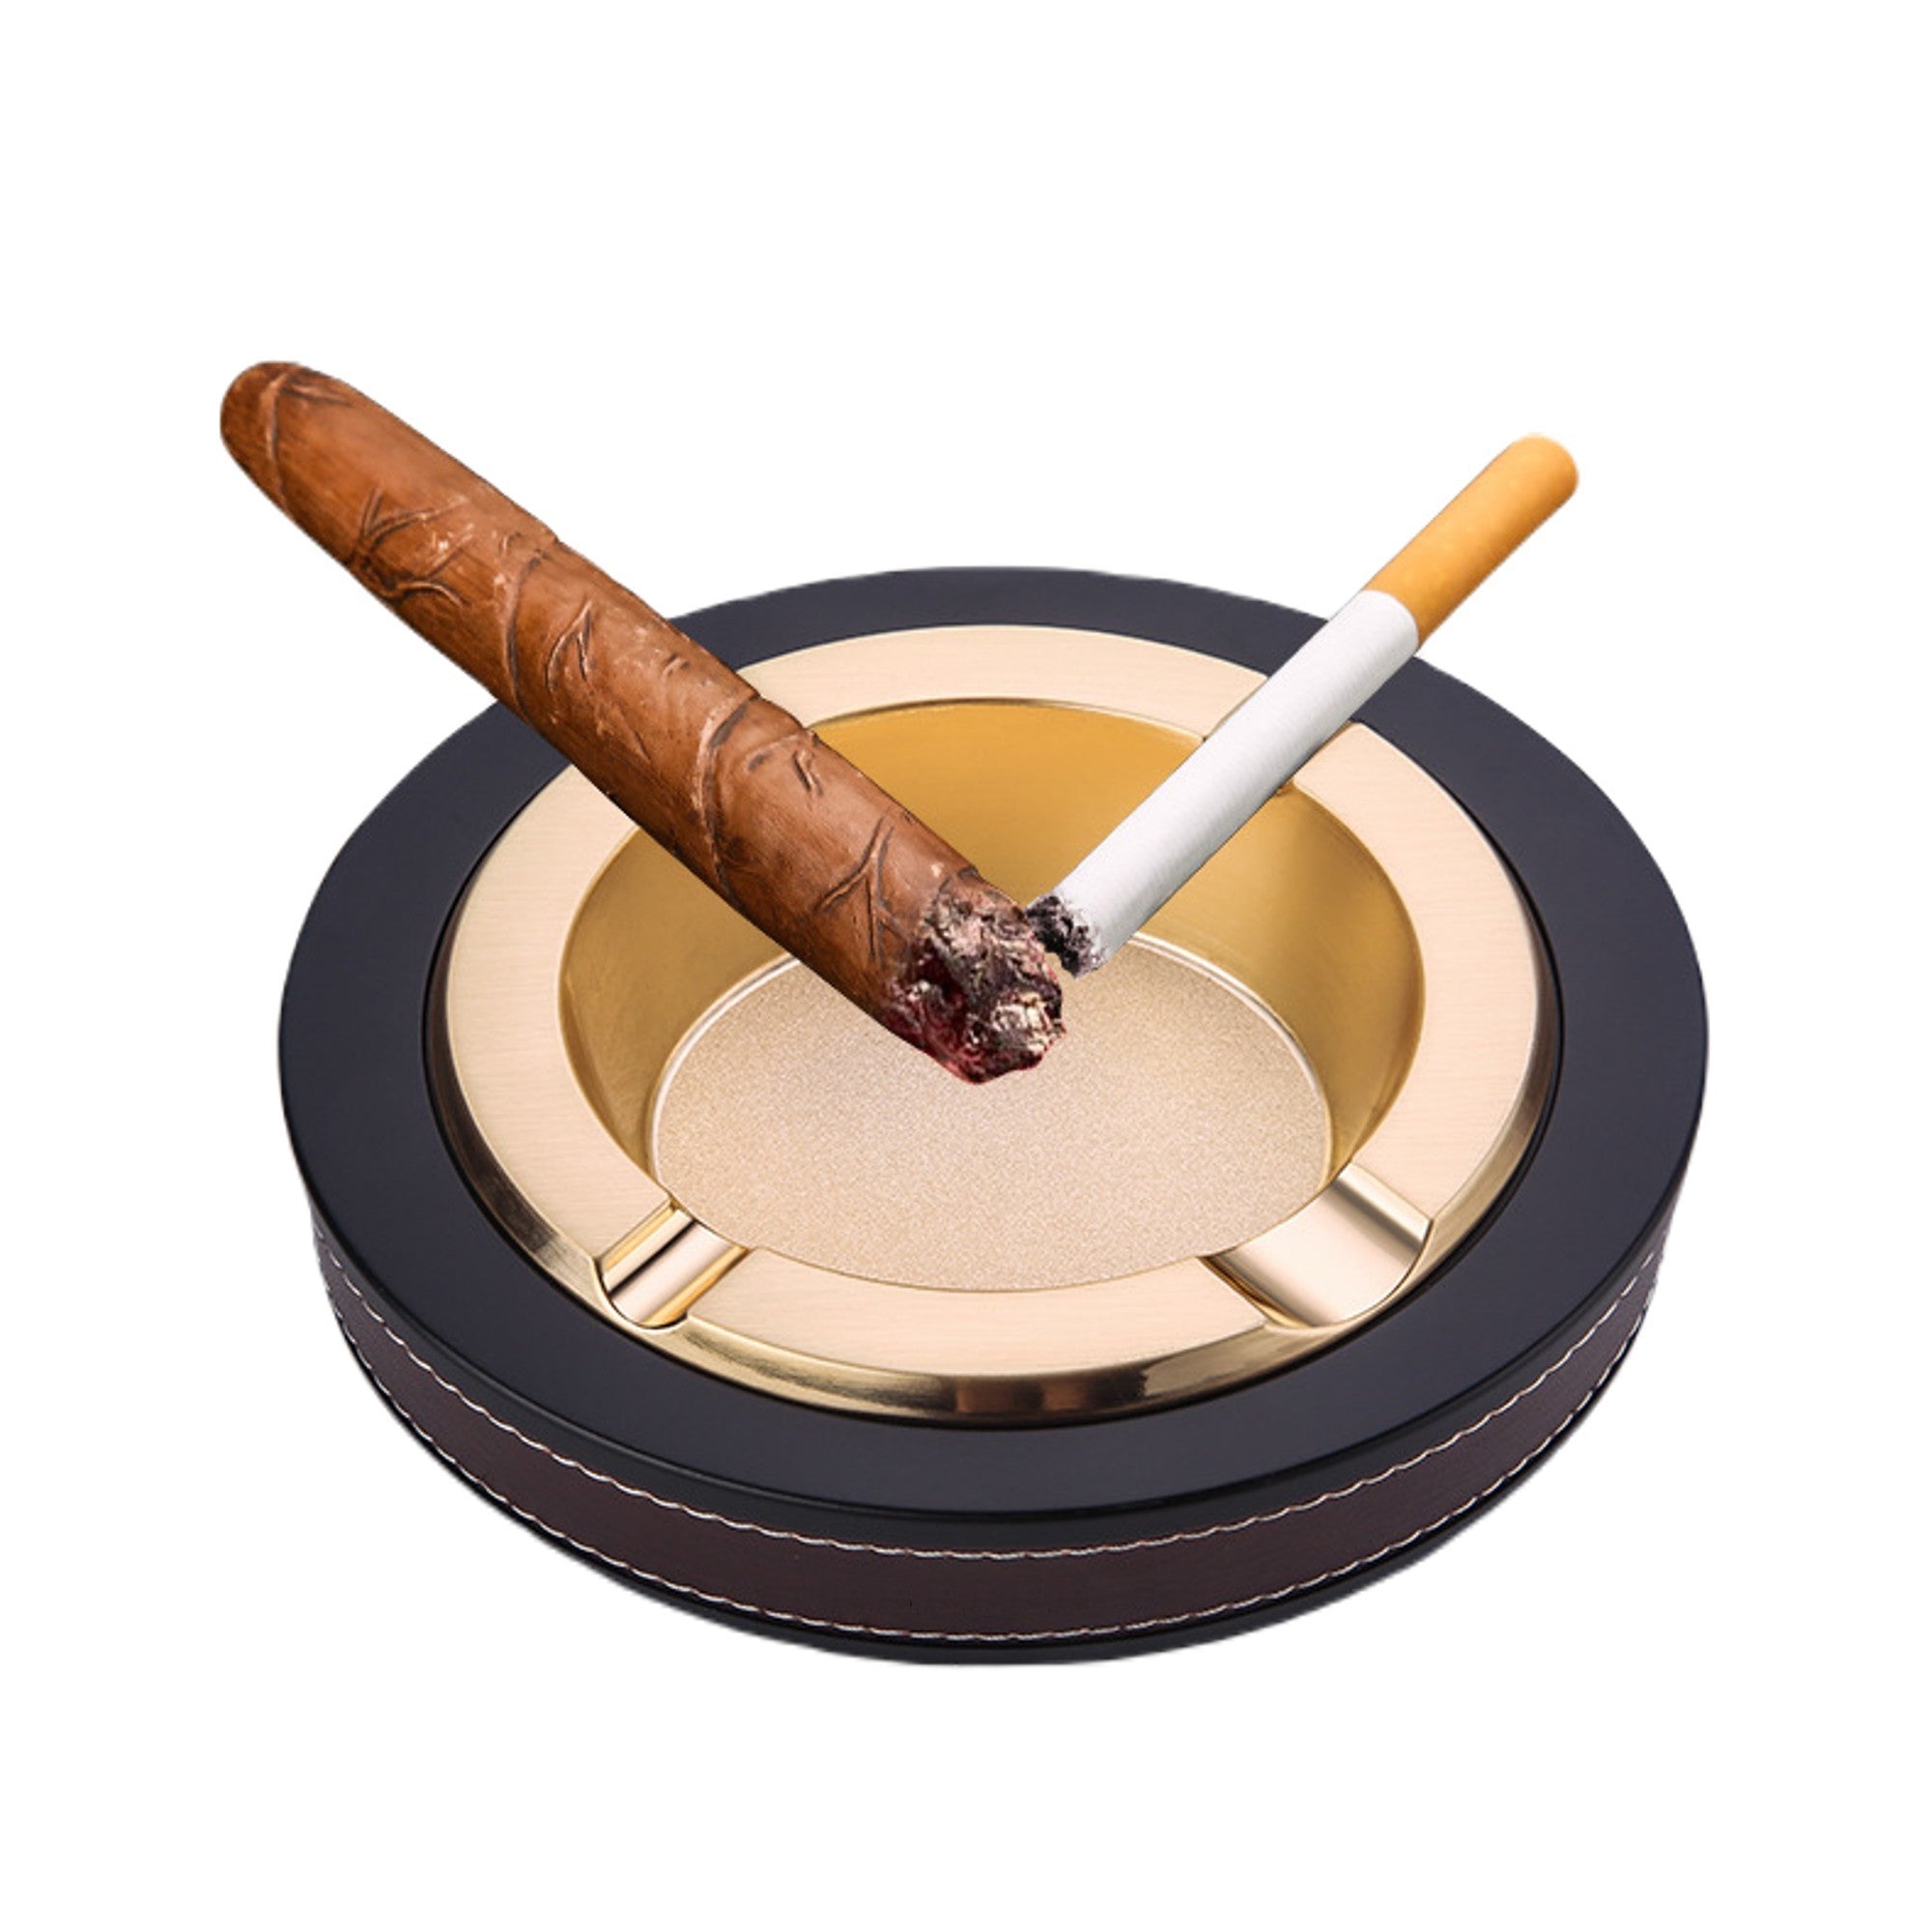  Clearance 2 in 1 Multifunctional Smokless Ashtray